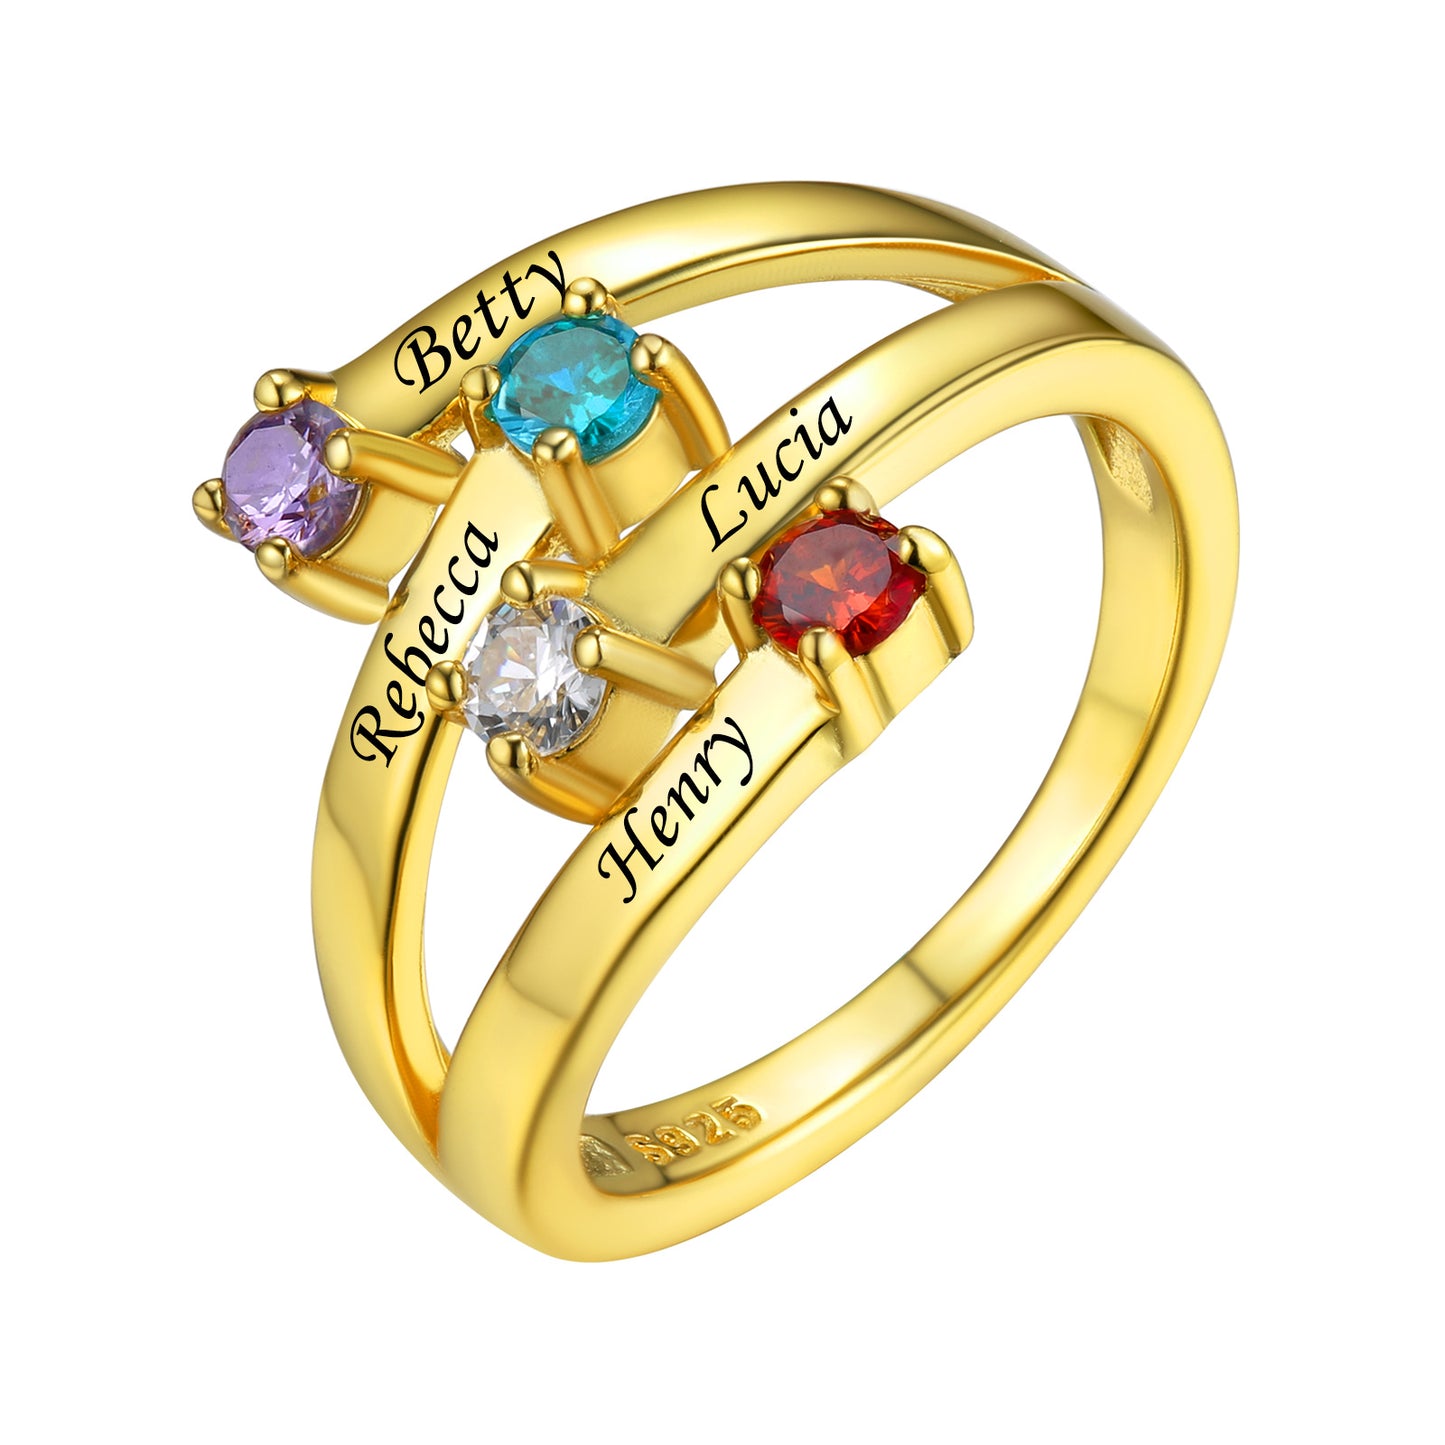 Adjustable Sterling Silver Personalized Birthstone Ring Gold 4 Stone